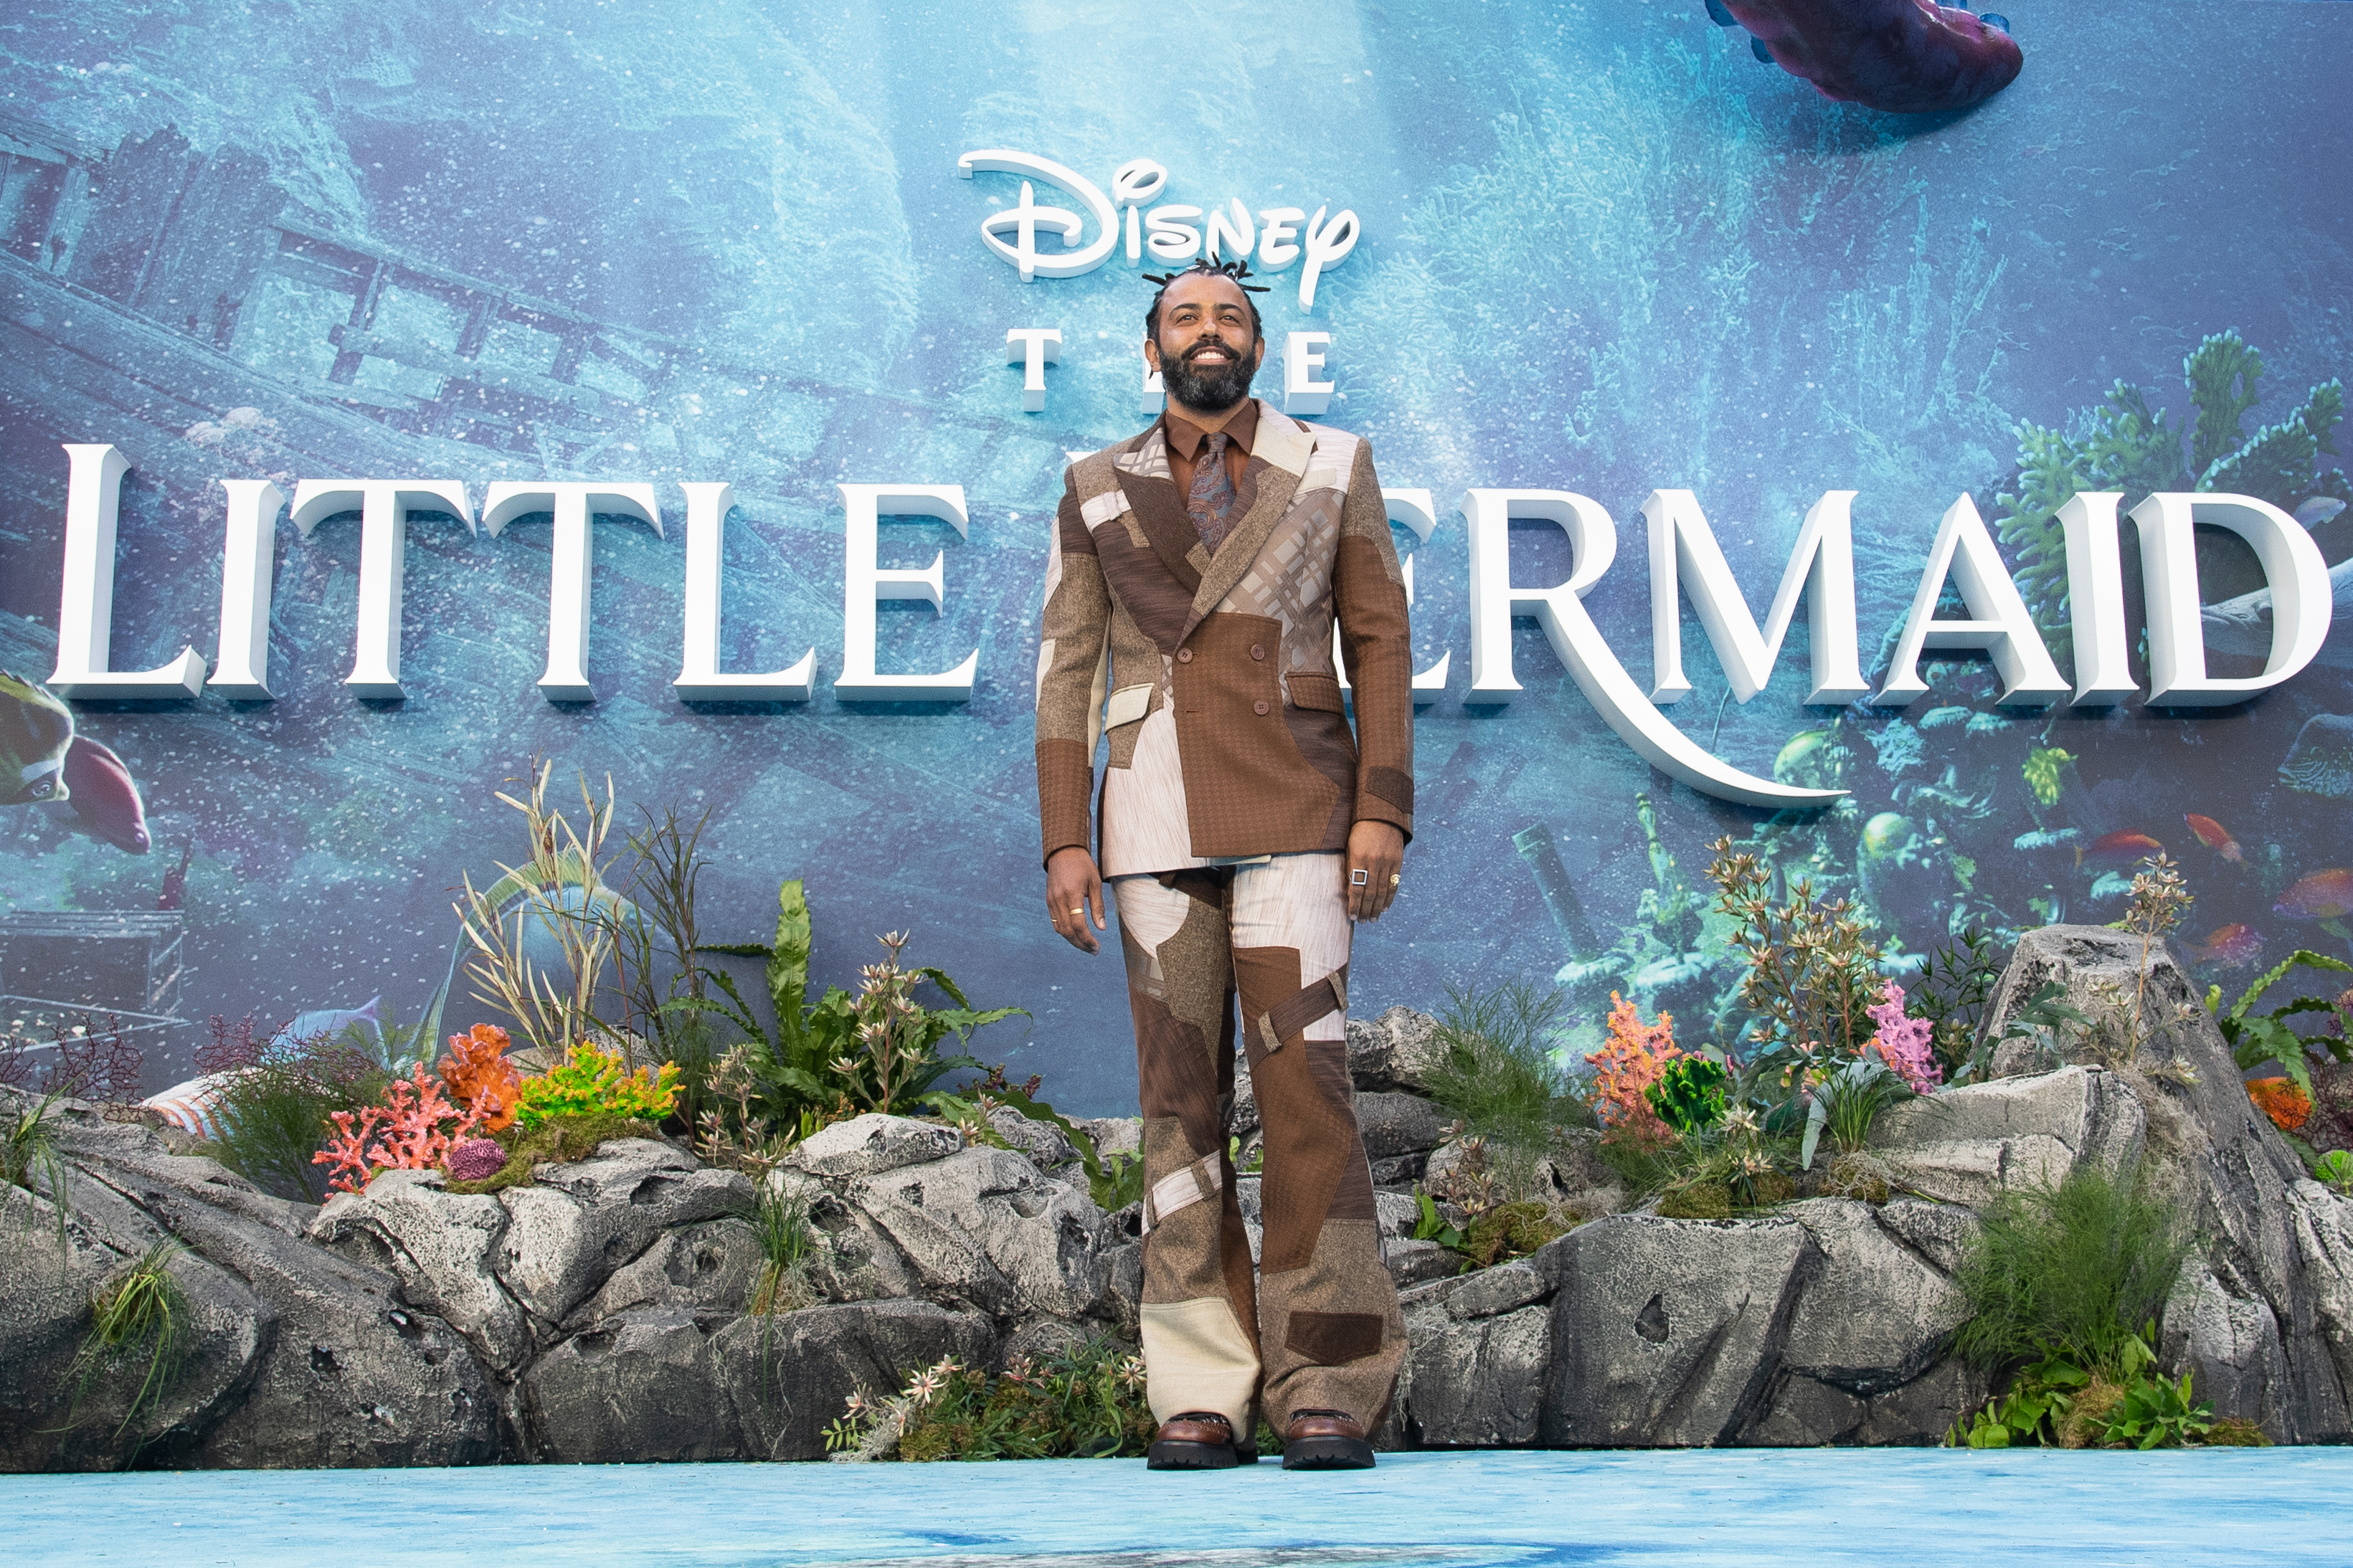 Daveed Diggs attends the UK premiere of "The Little Mermaid" at Odeon Luxe Leicester Square, on May 15, 2023, in London, England. | Source: Getty Images